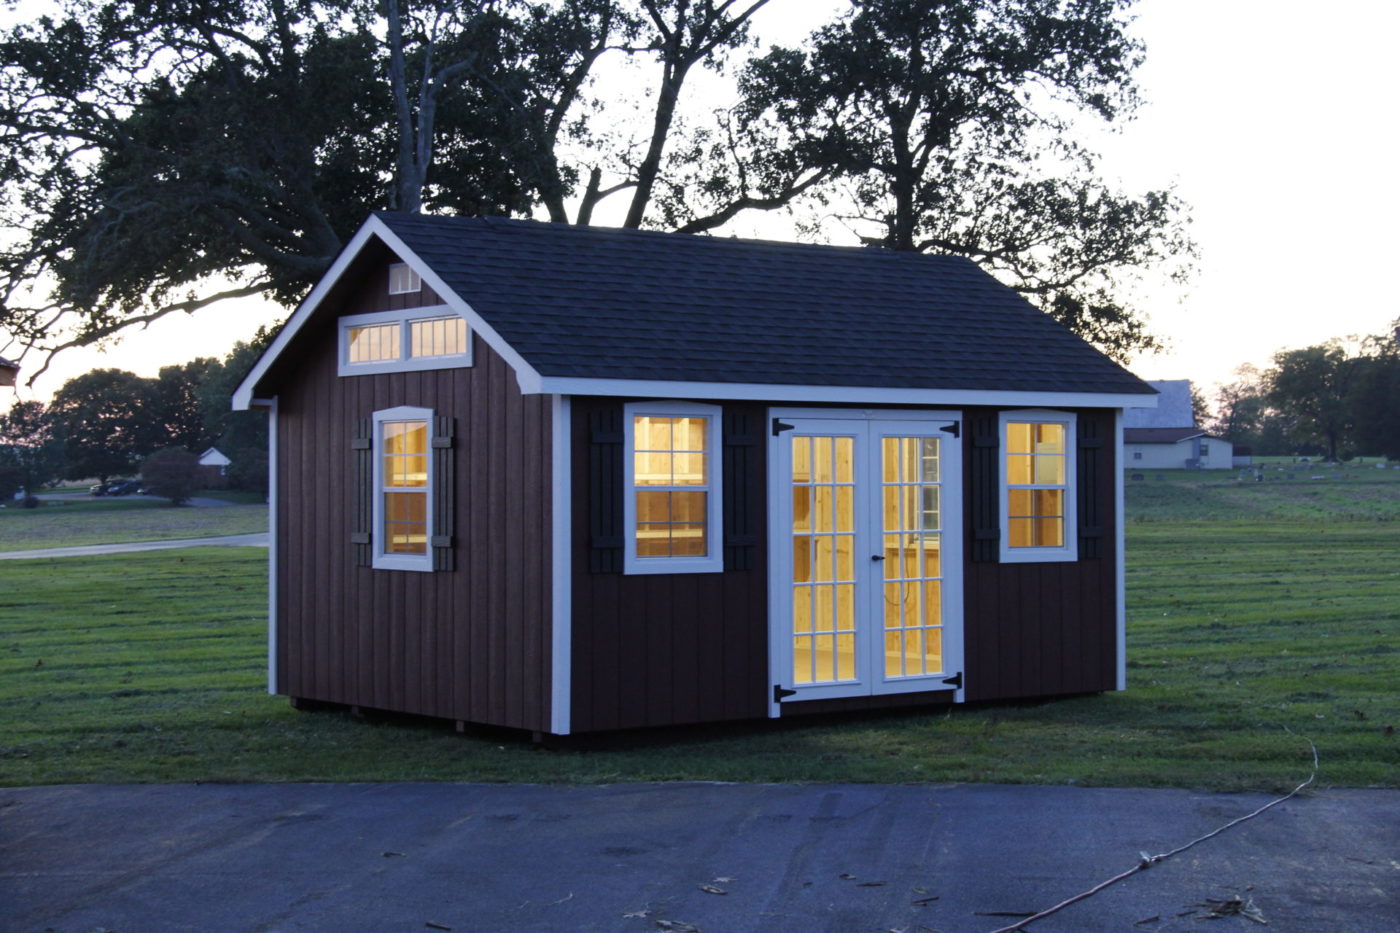 12x16 a 7 12 pitch optional full view doors, windows, shutters, transome windows, ridge vent, dimentional roof 3 1 